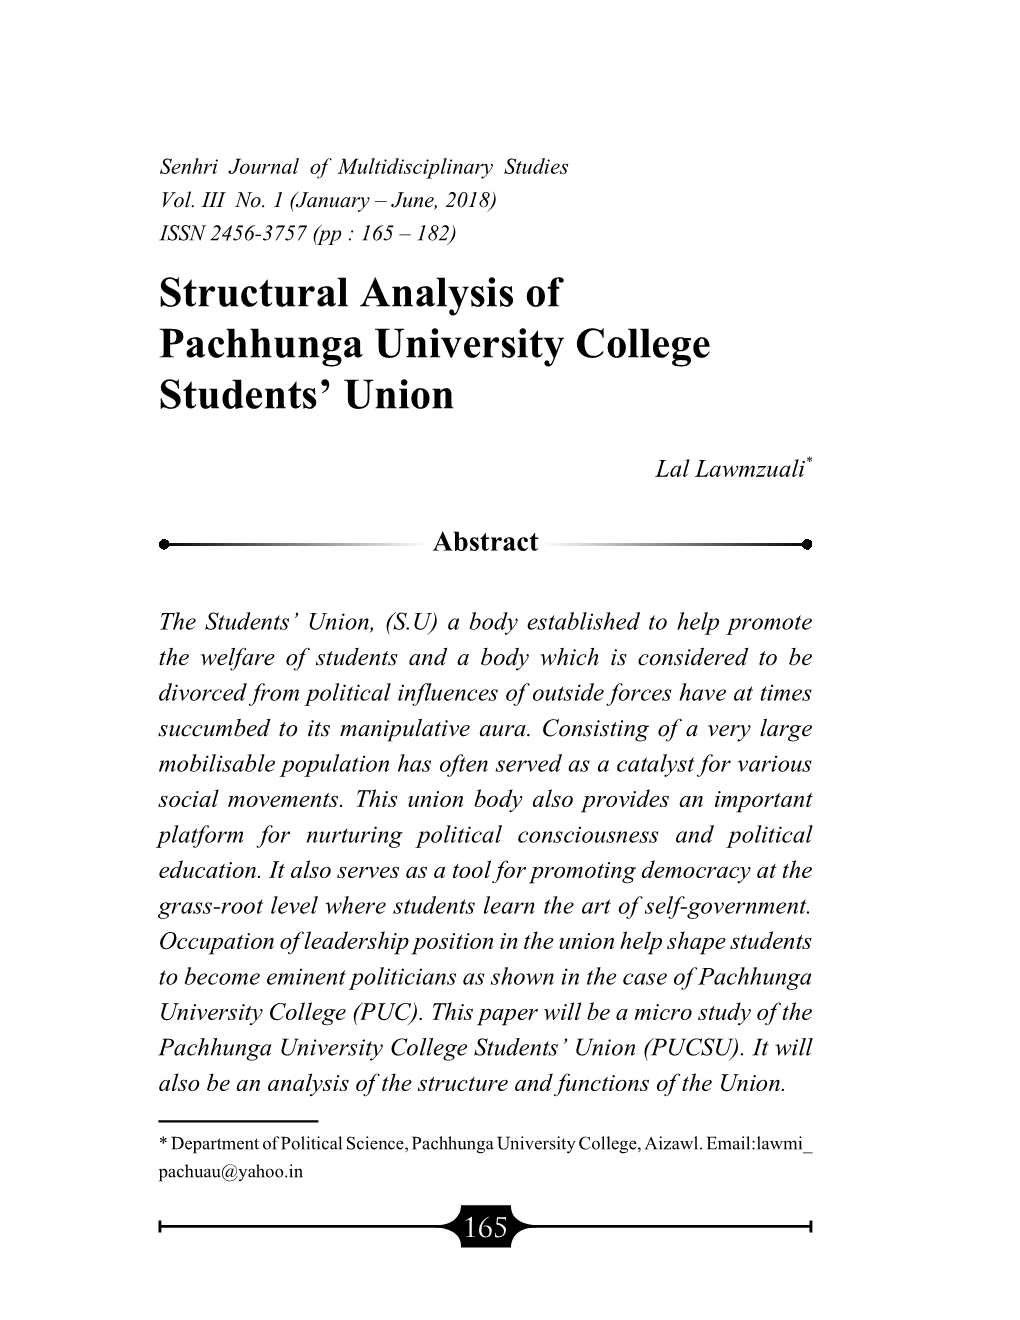 Structural Analysis of Pachhunga University College Students' Union